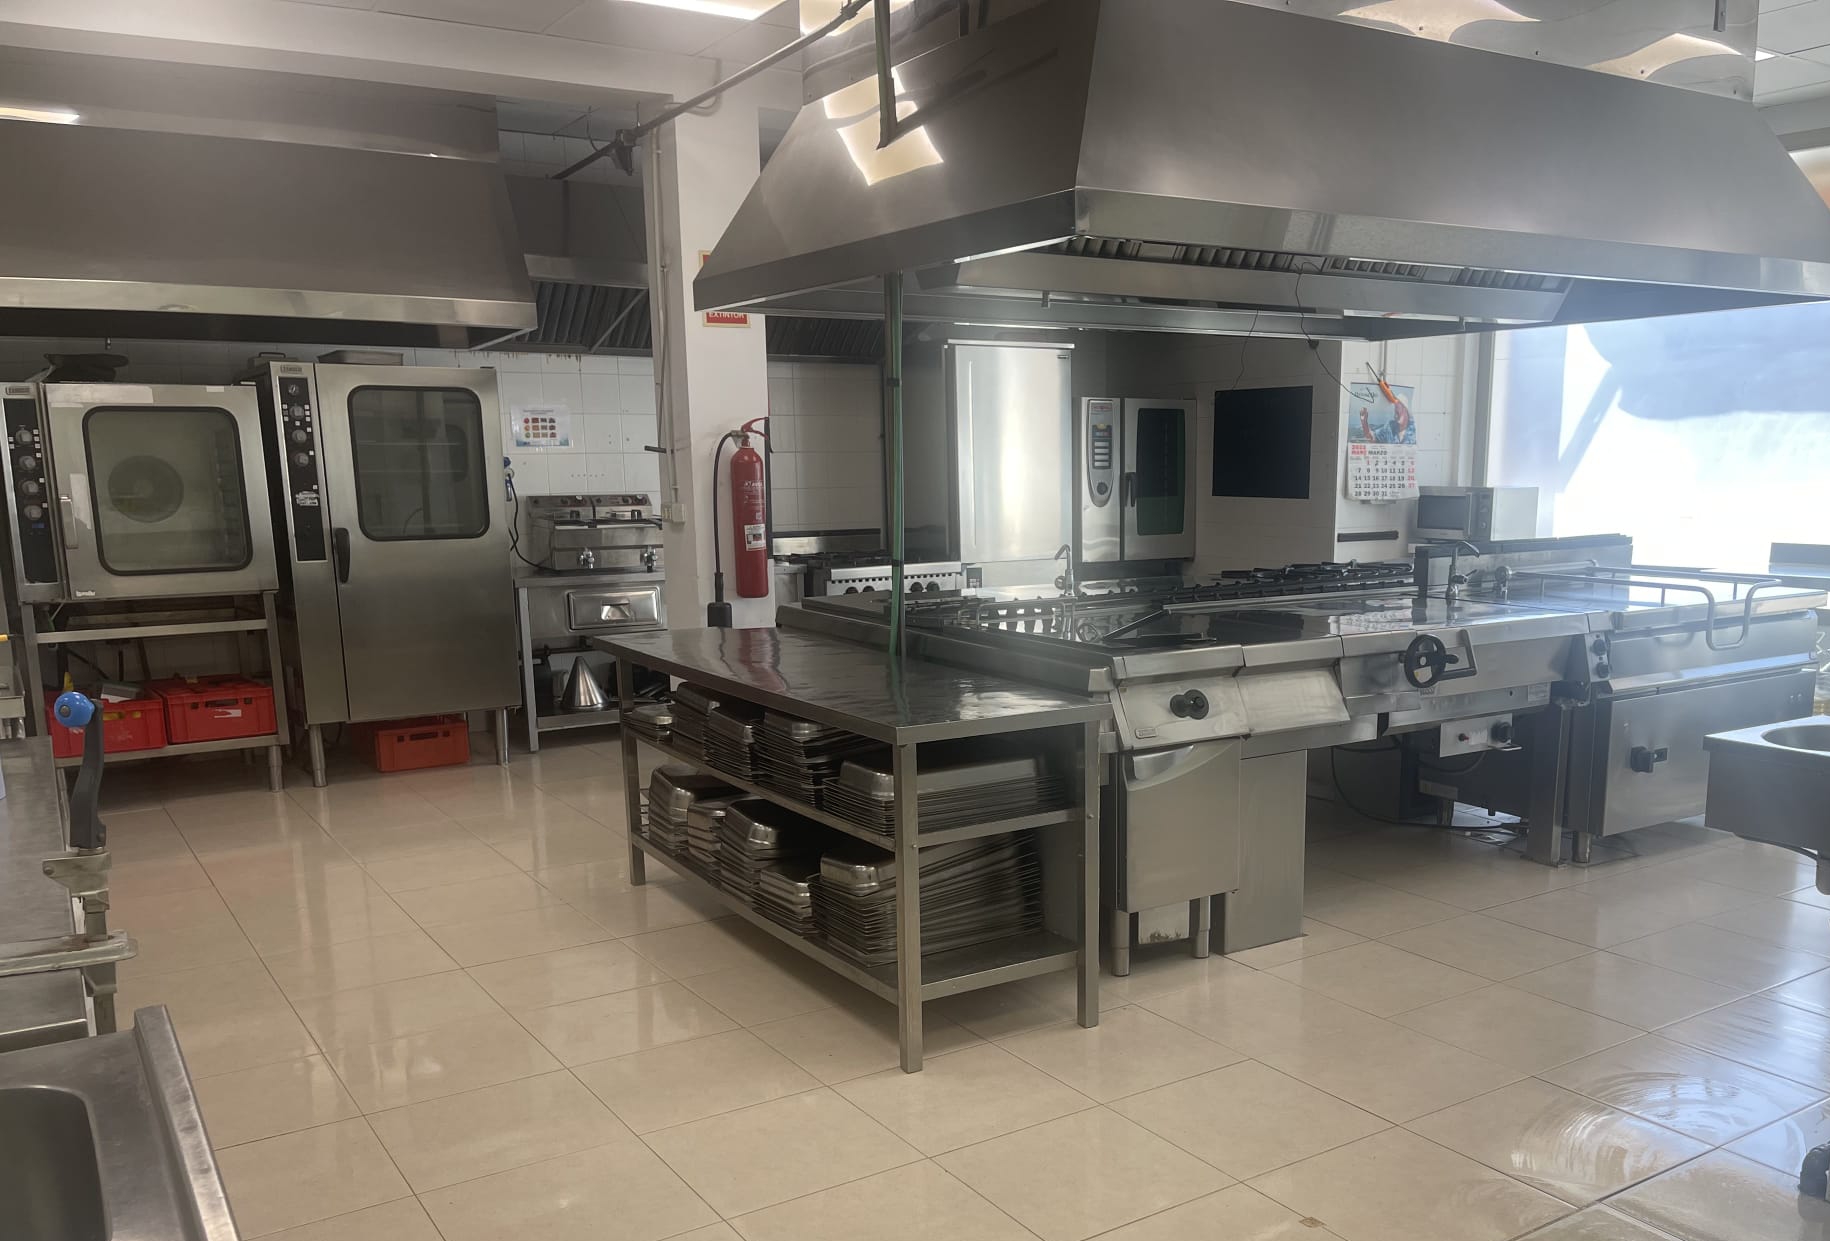 Image of the kitchen of our facilities.